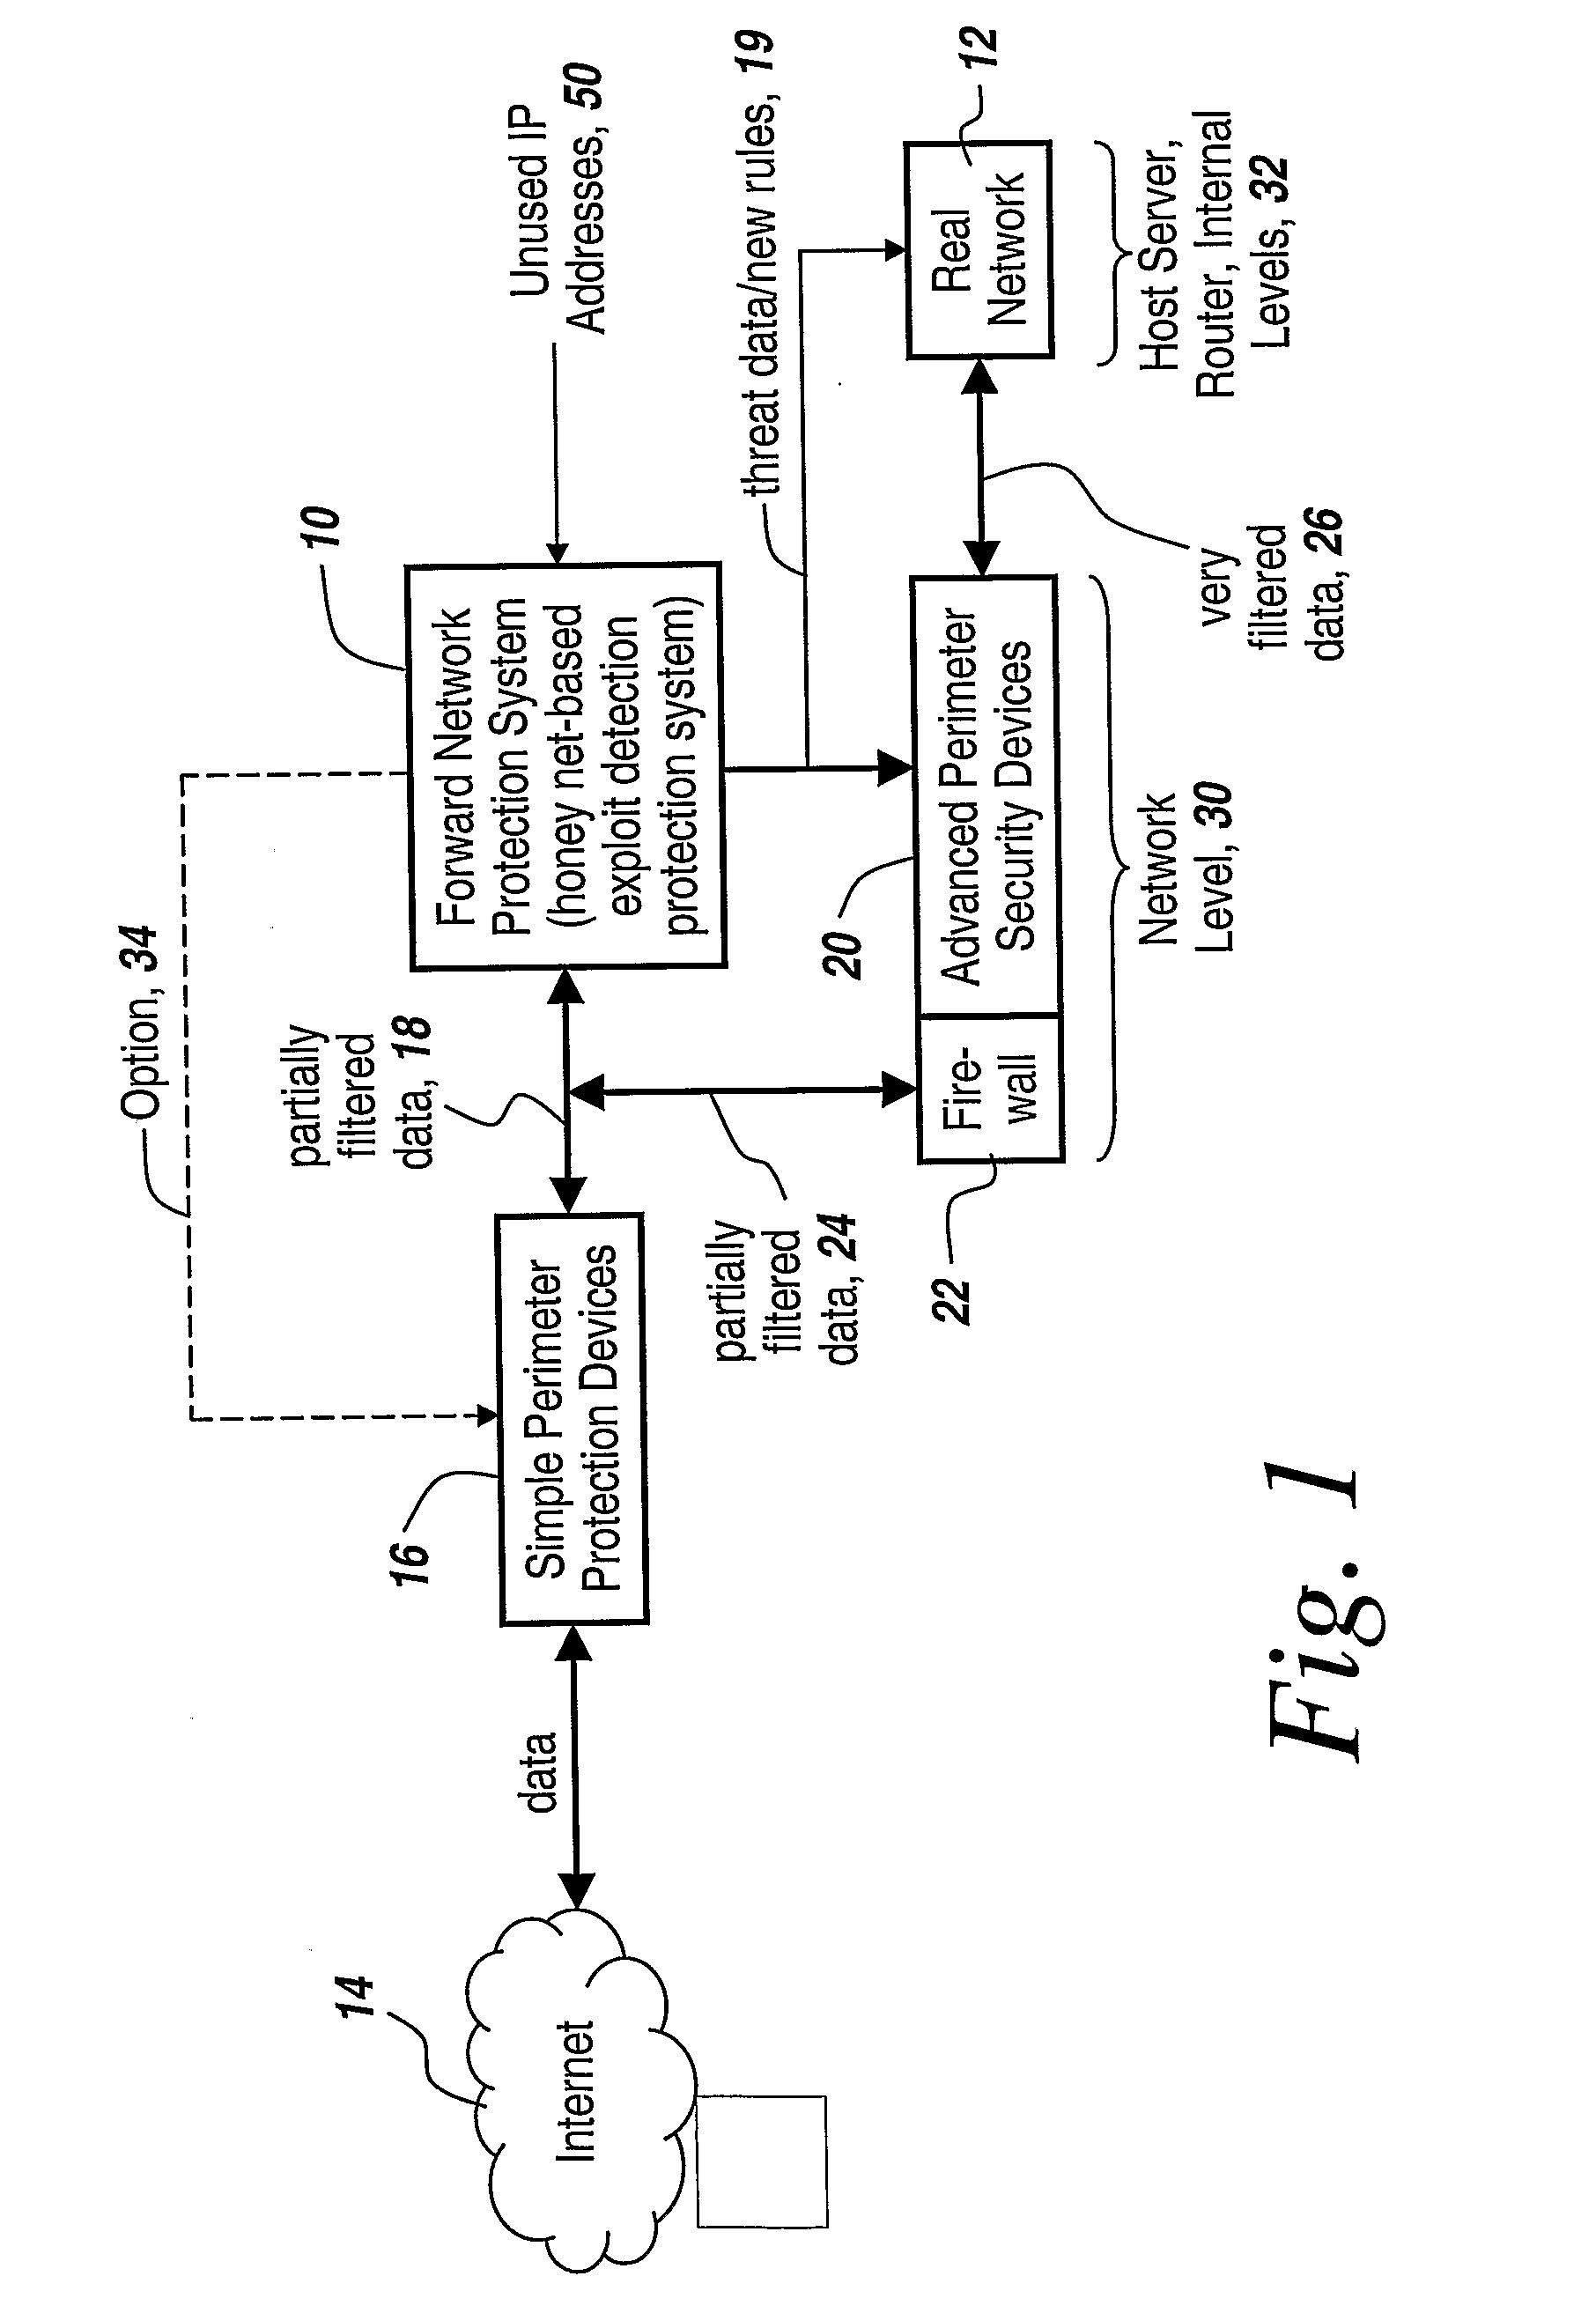 Method and Apparatus for Defending Against Zero-Day Worm-Based Attacks